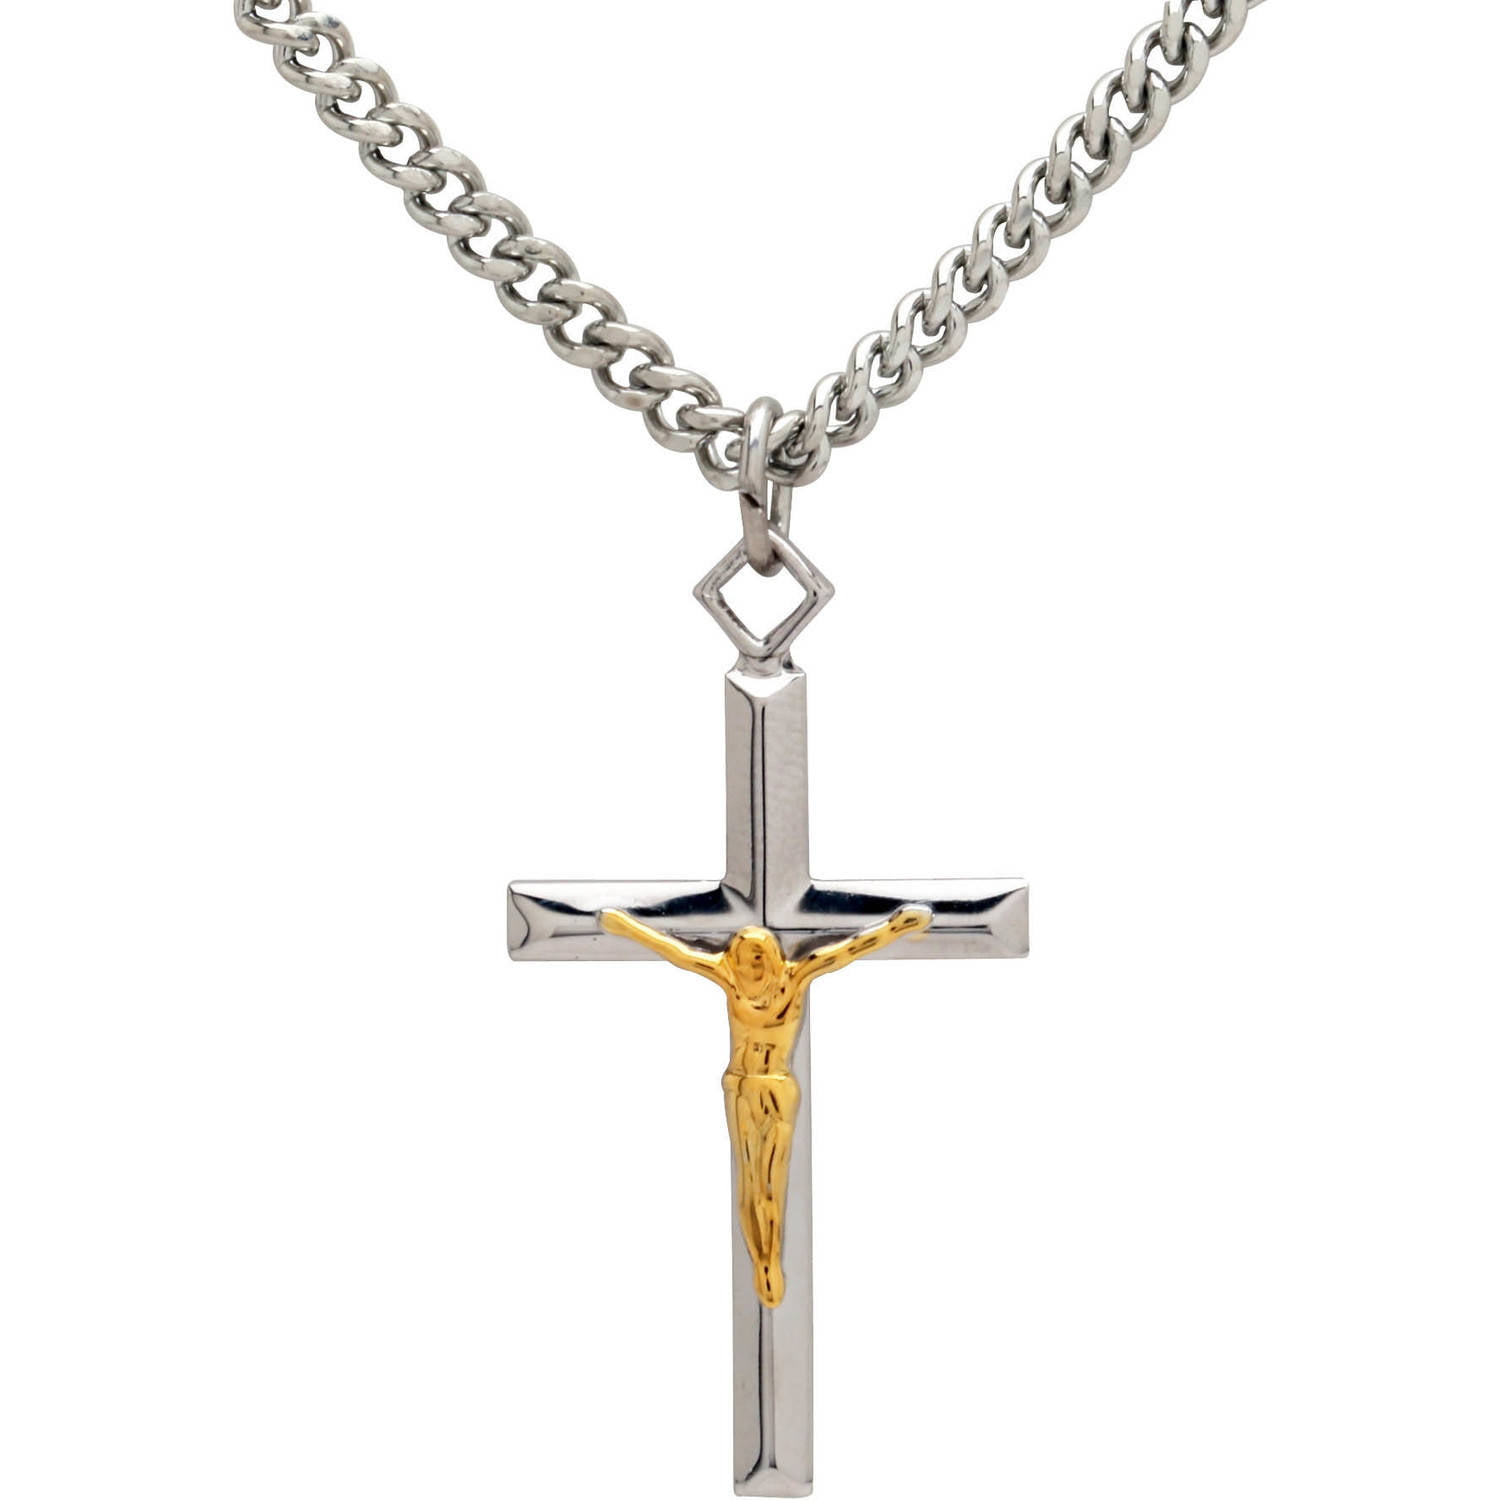 Stainless Steel Crystal Cross Crucifix Pendant Necklace